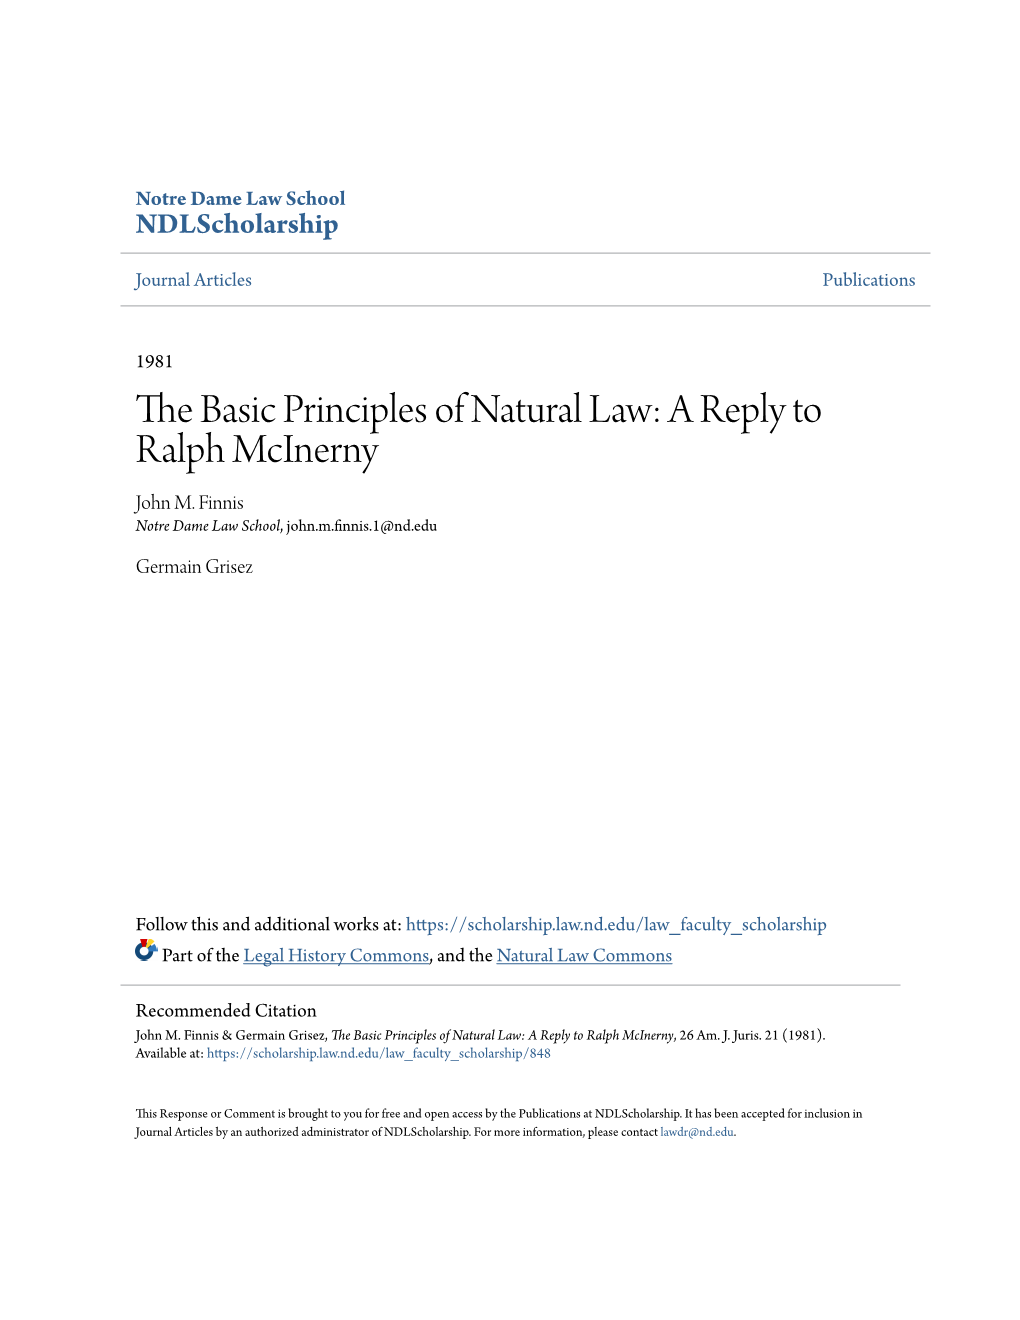 The Basic Principles of Natural Law: a Reply to Ralph Mcinerny, 26 Am